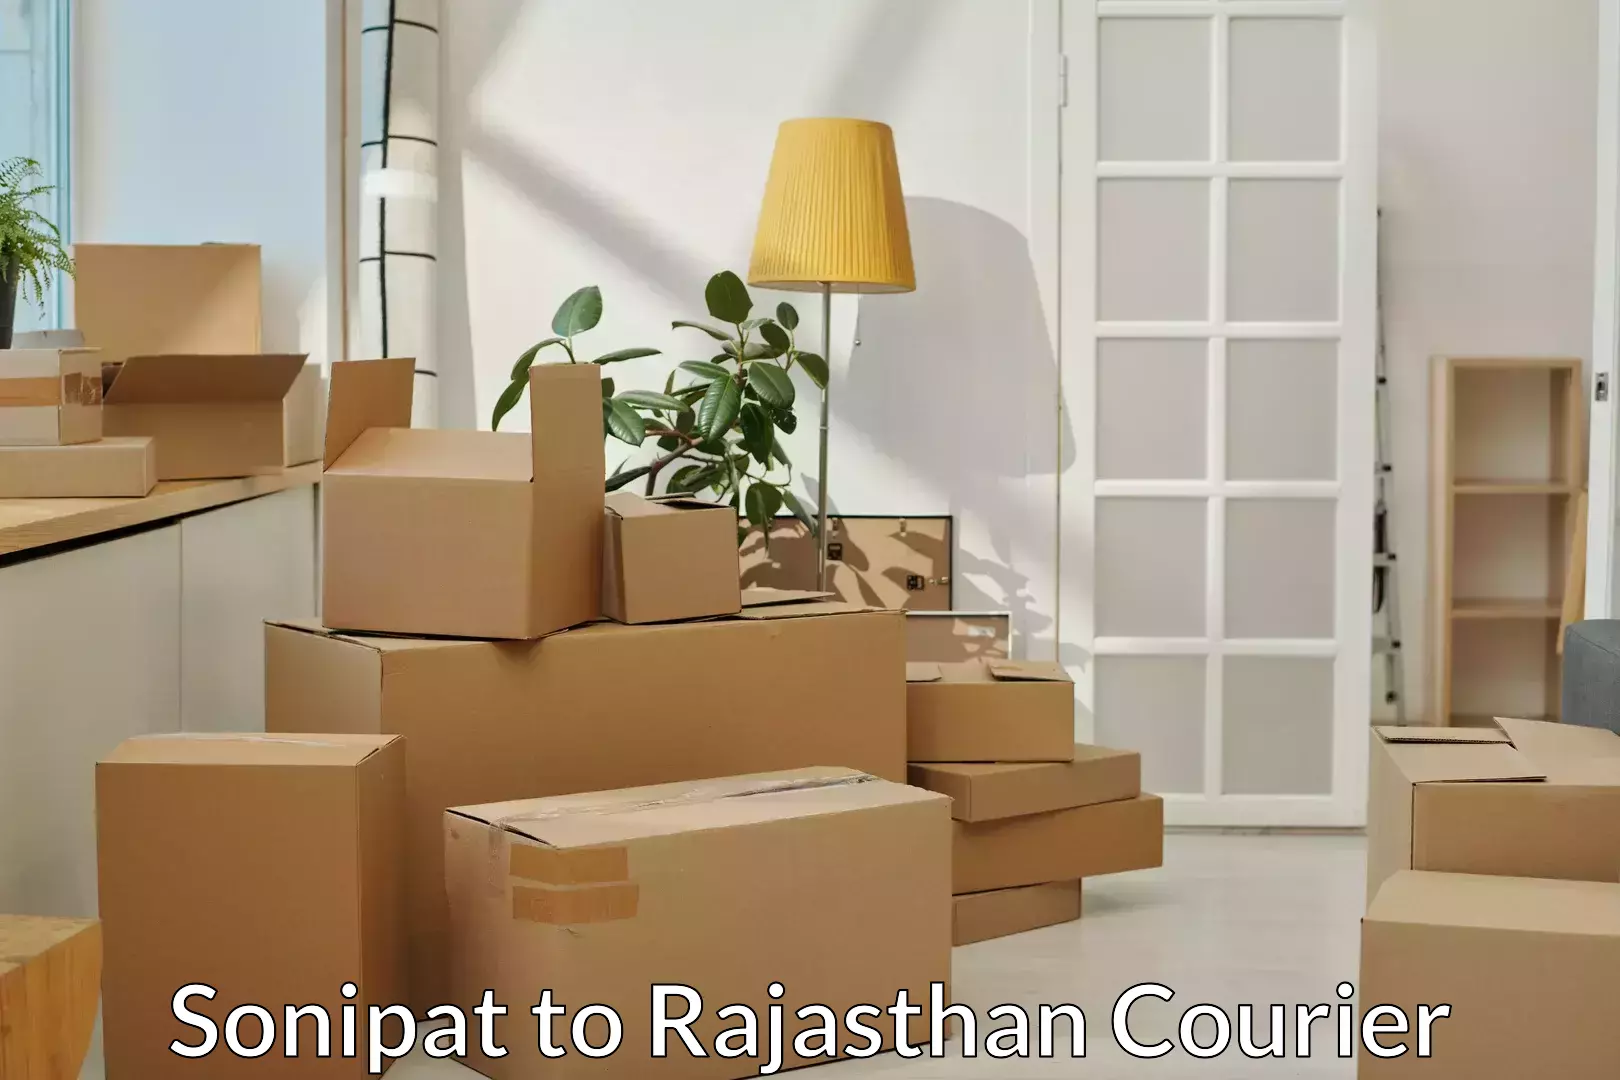 Budget-friendly movers Sonipat to Sikar